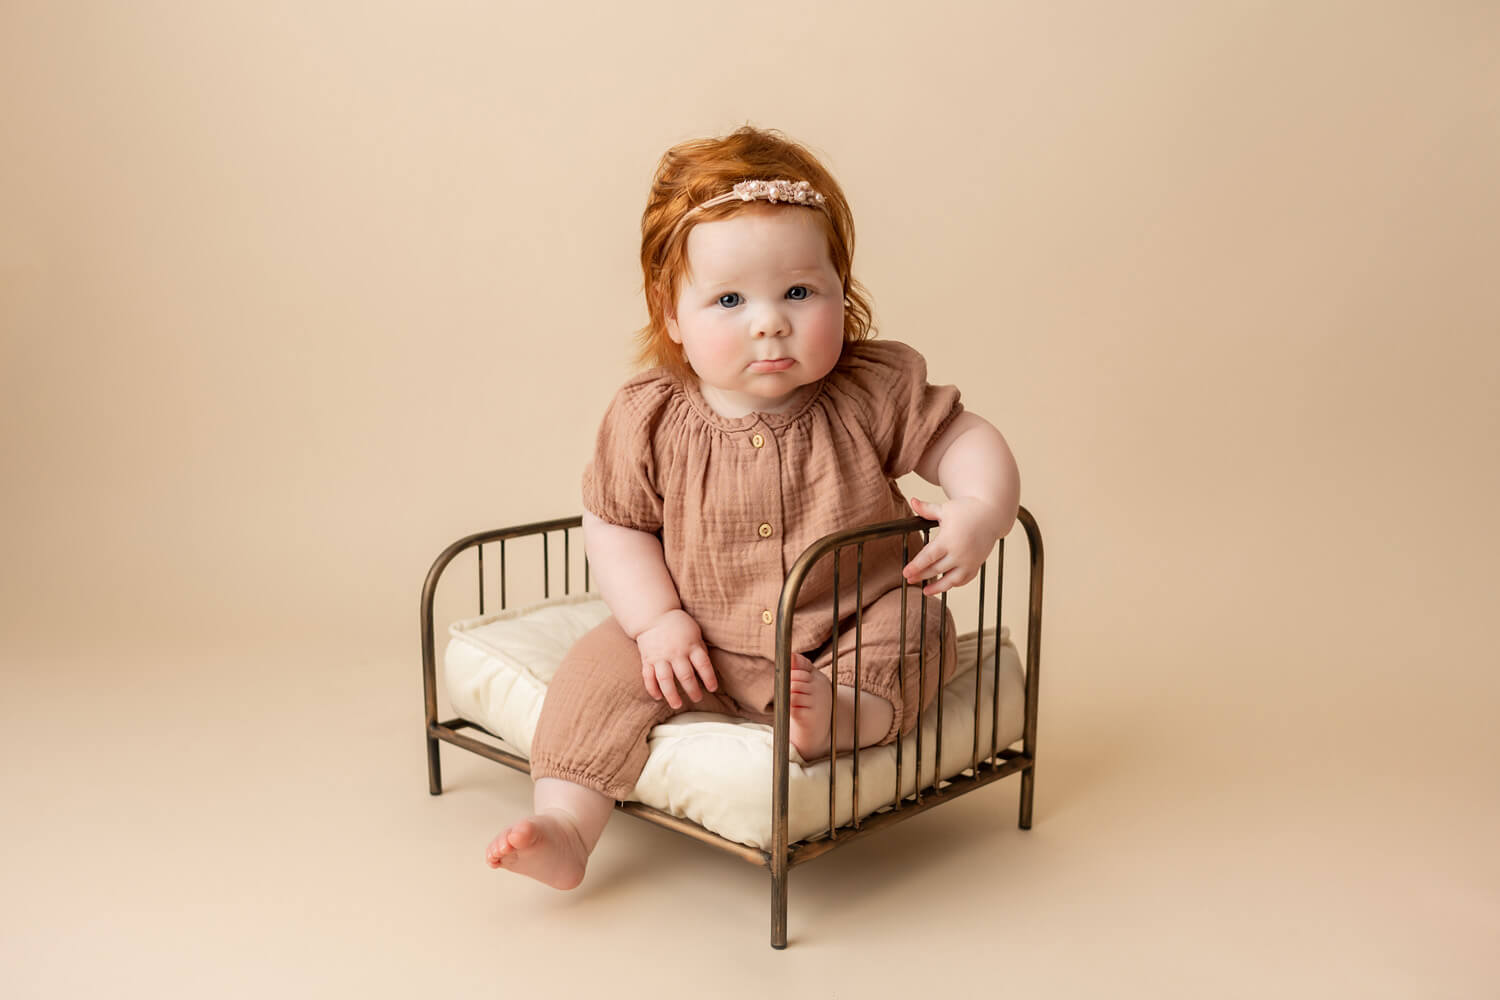 baby sitting on bed for 6 month photoshoot